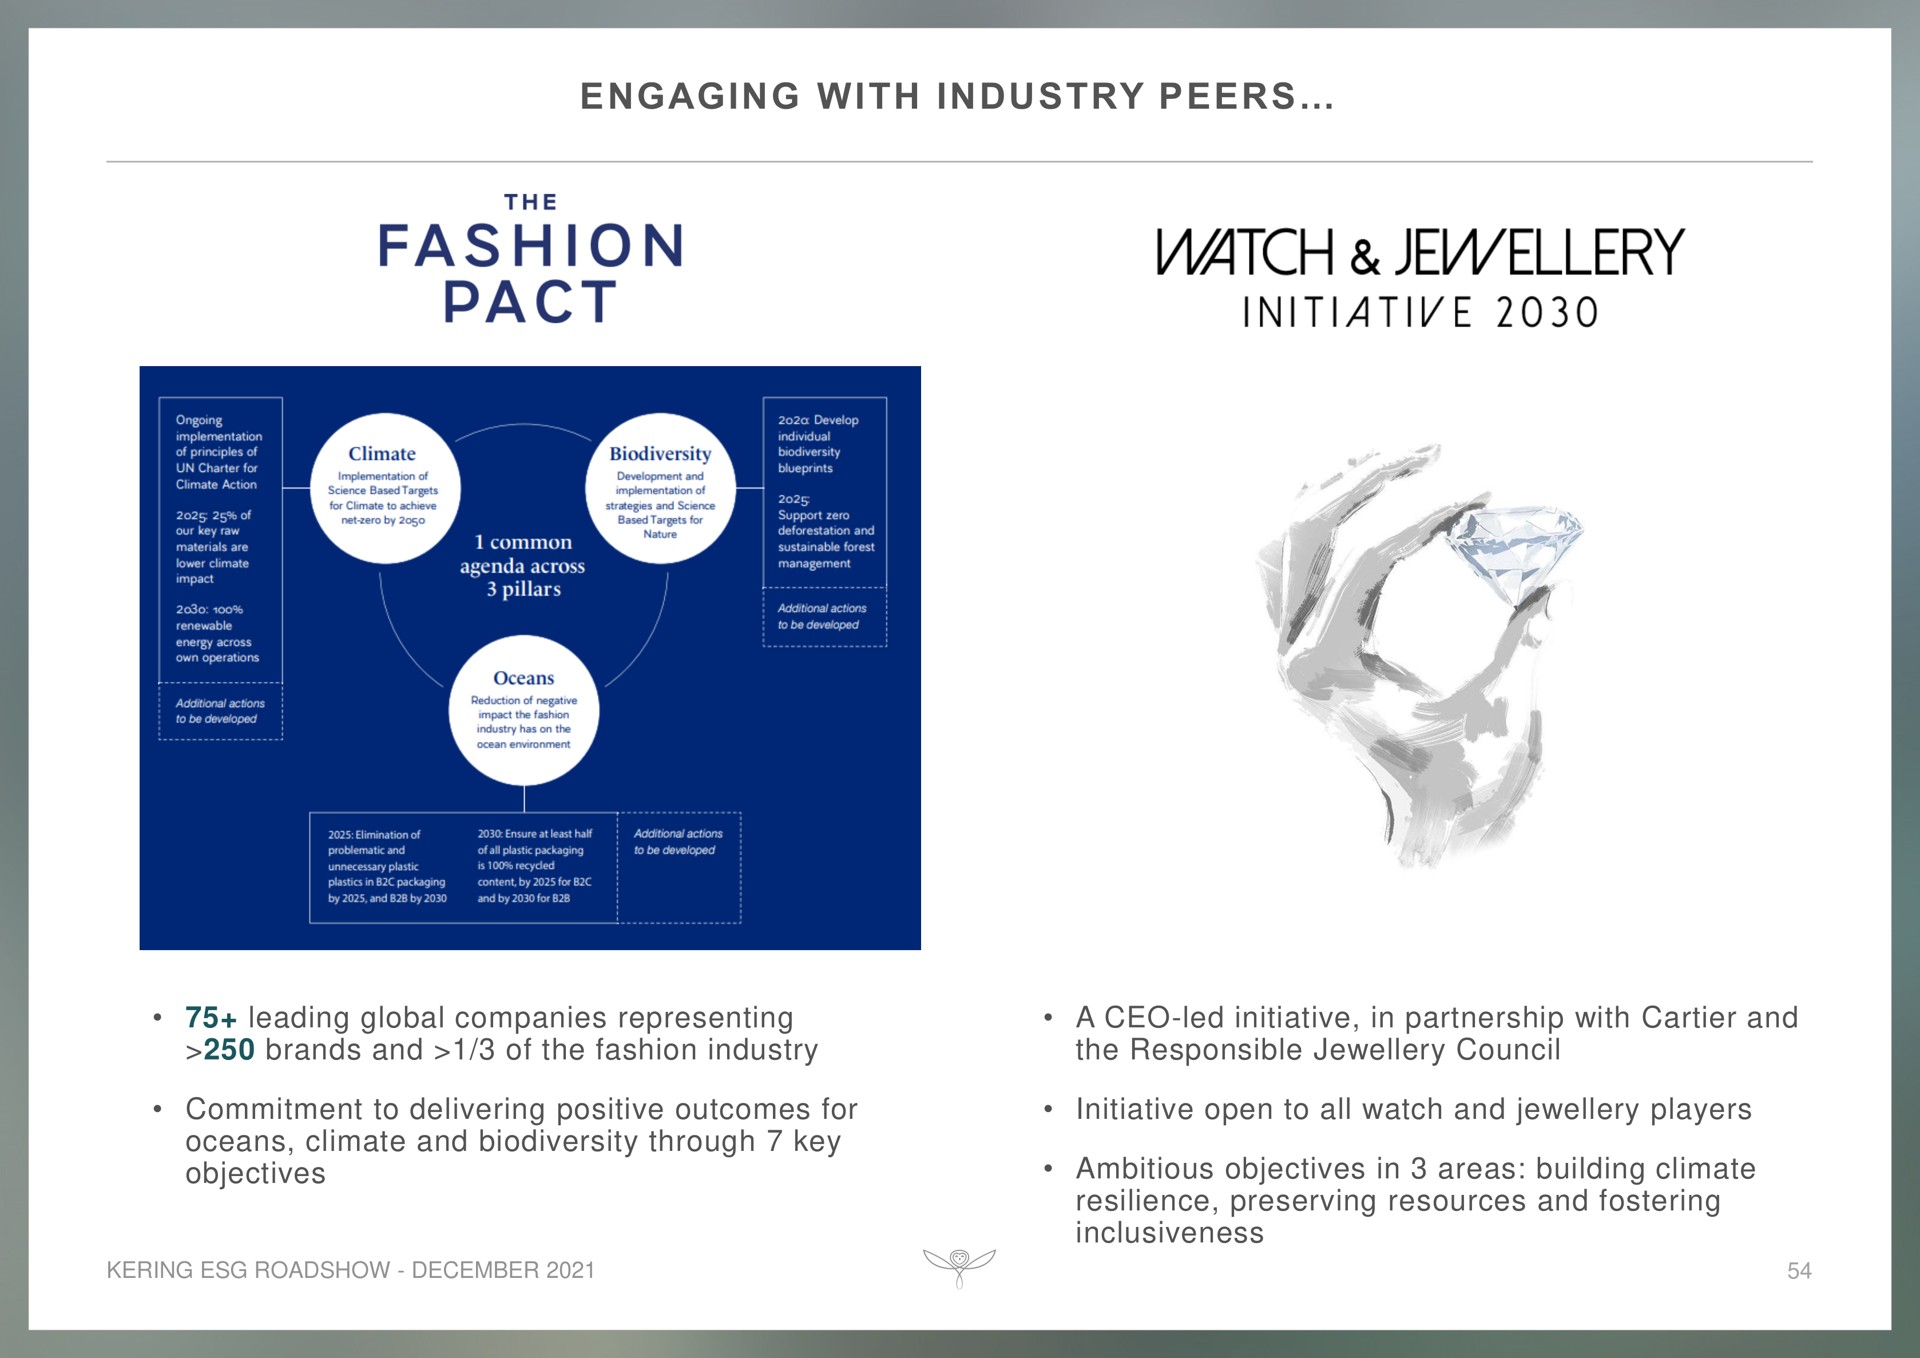 engaging with industry peers fashion pact watch initiative | Kering